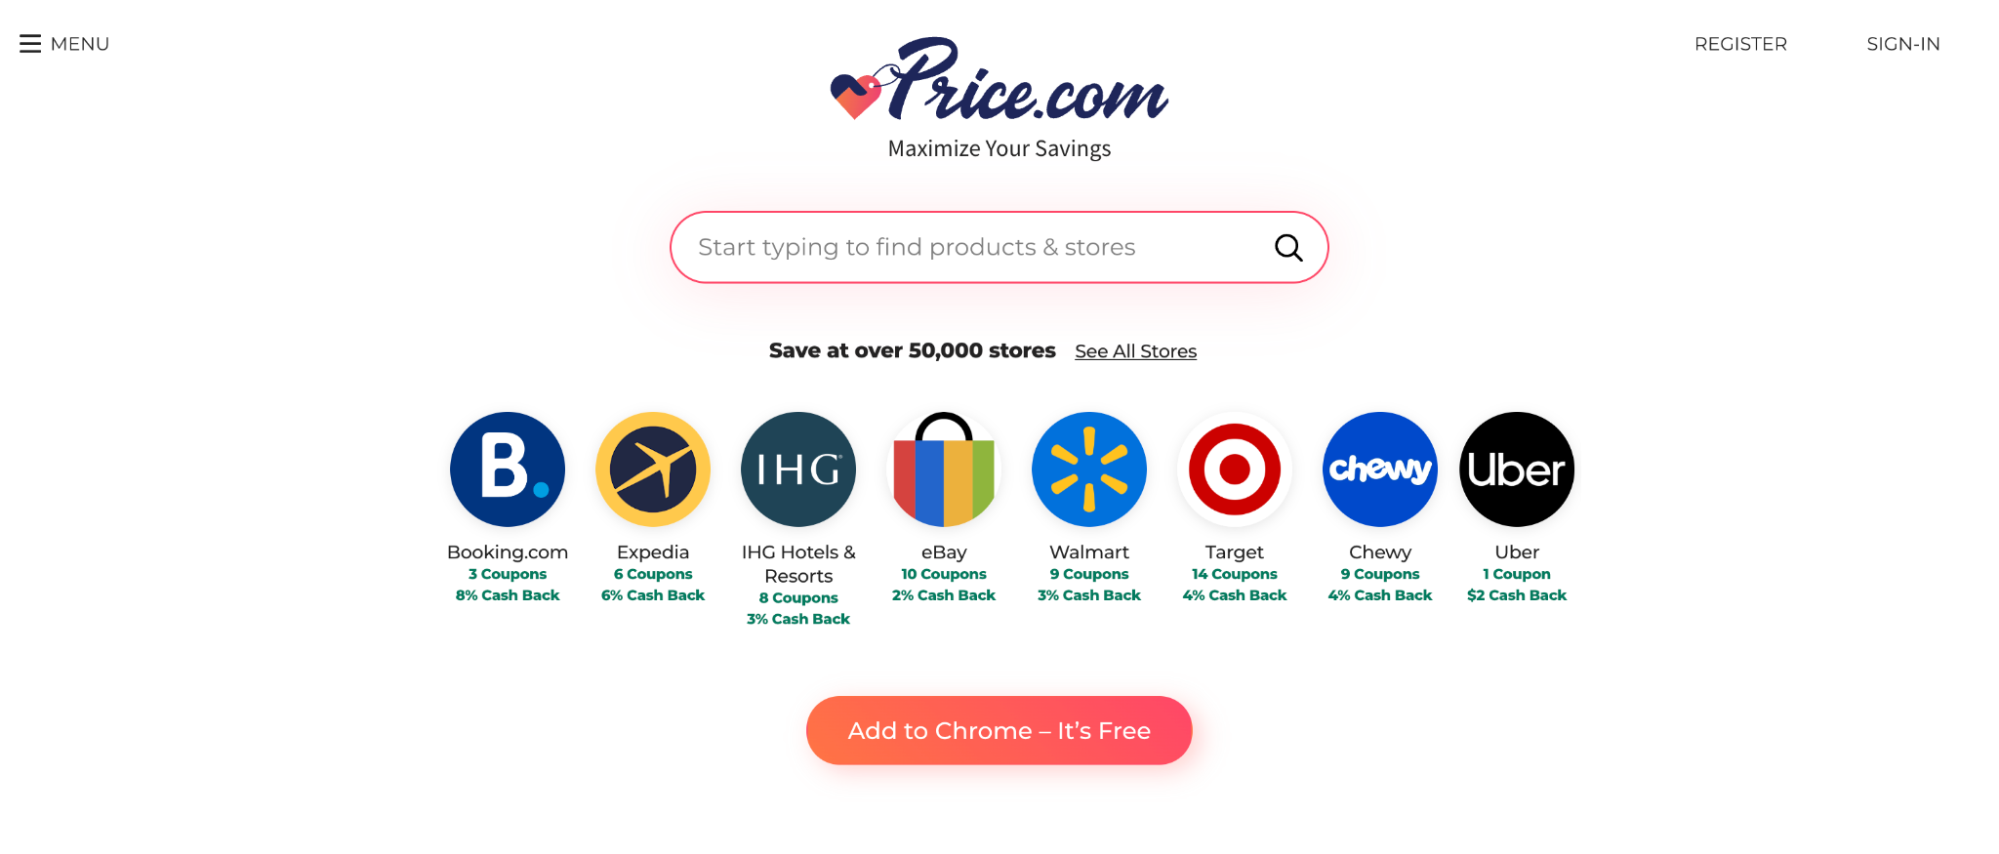 Price.com logo above a search bar and discount offers for major websites like eBay, Uber, and Target.